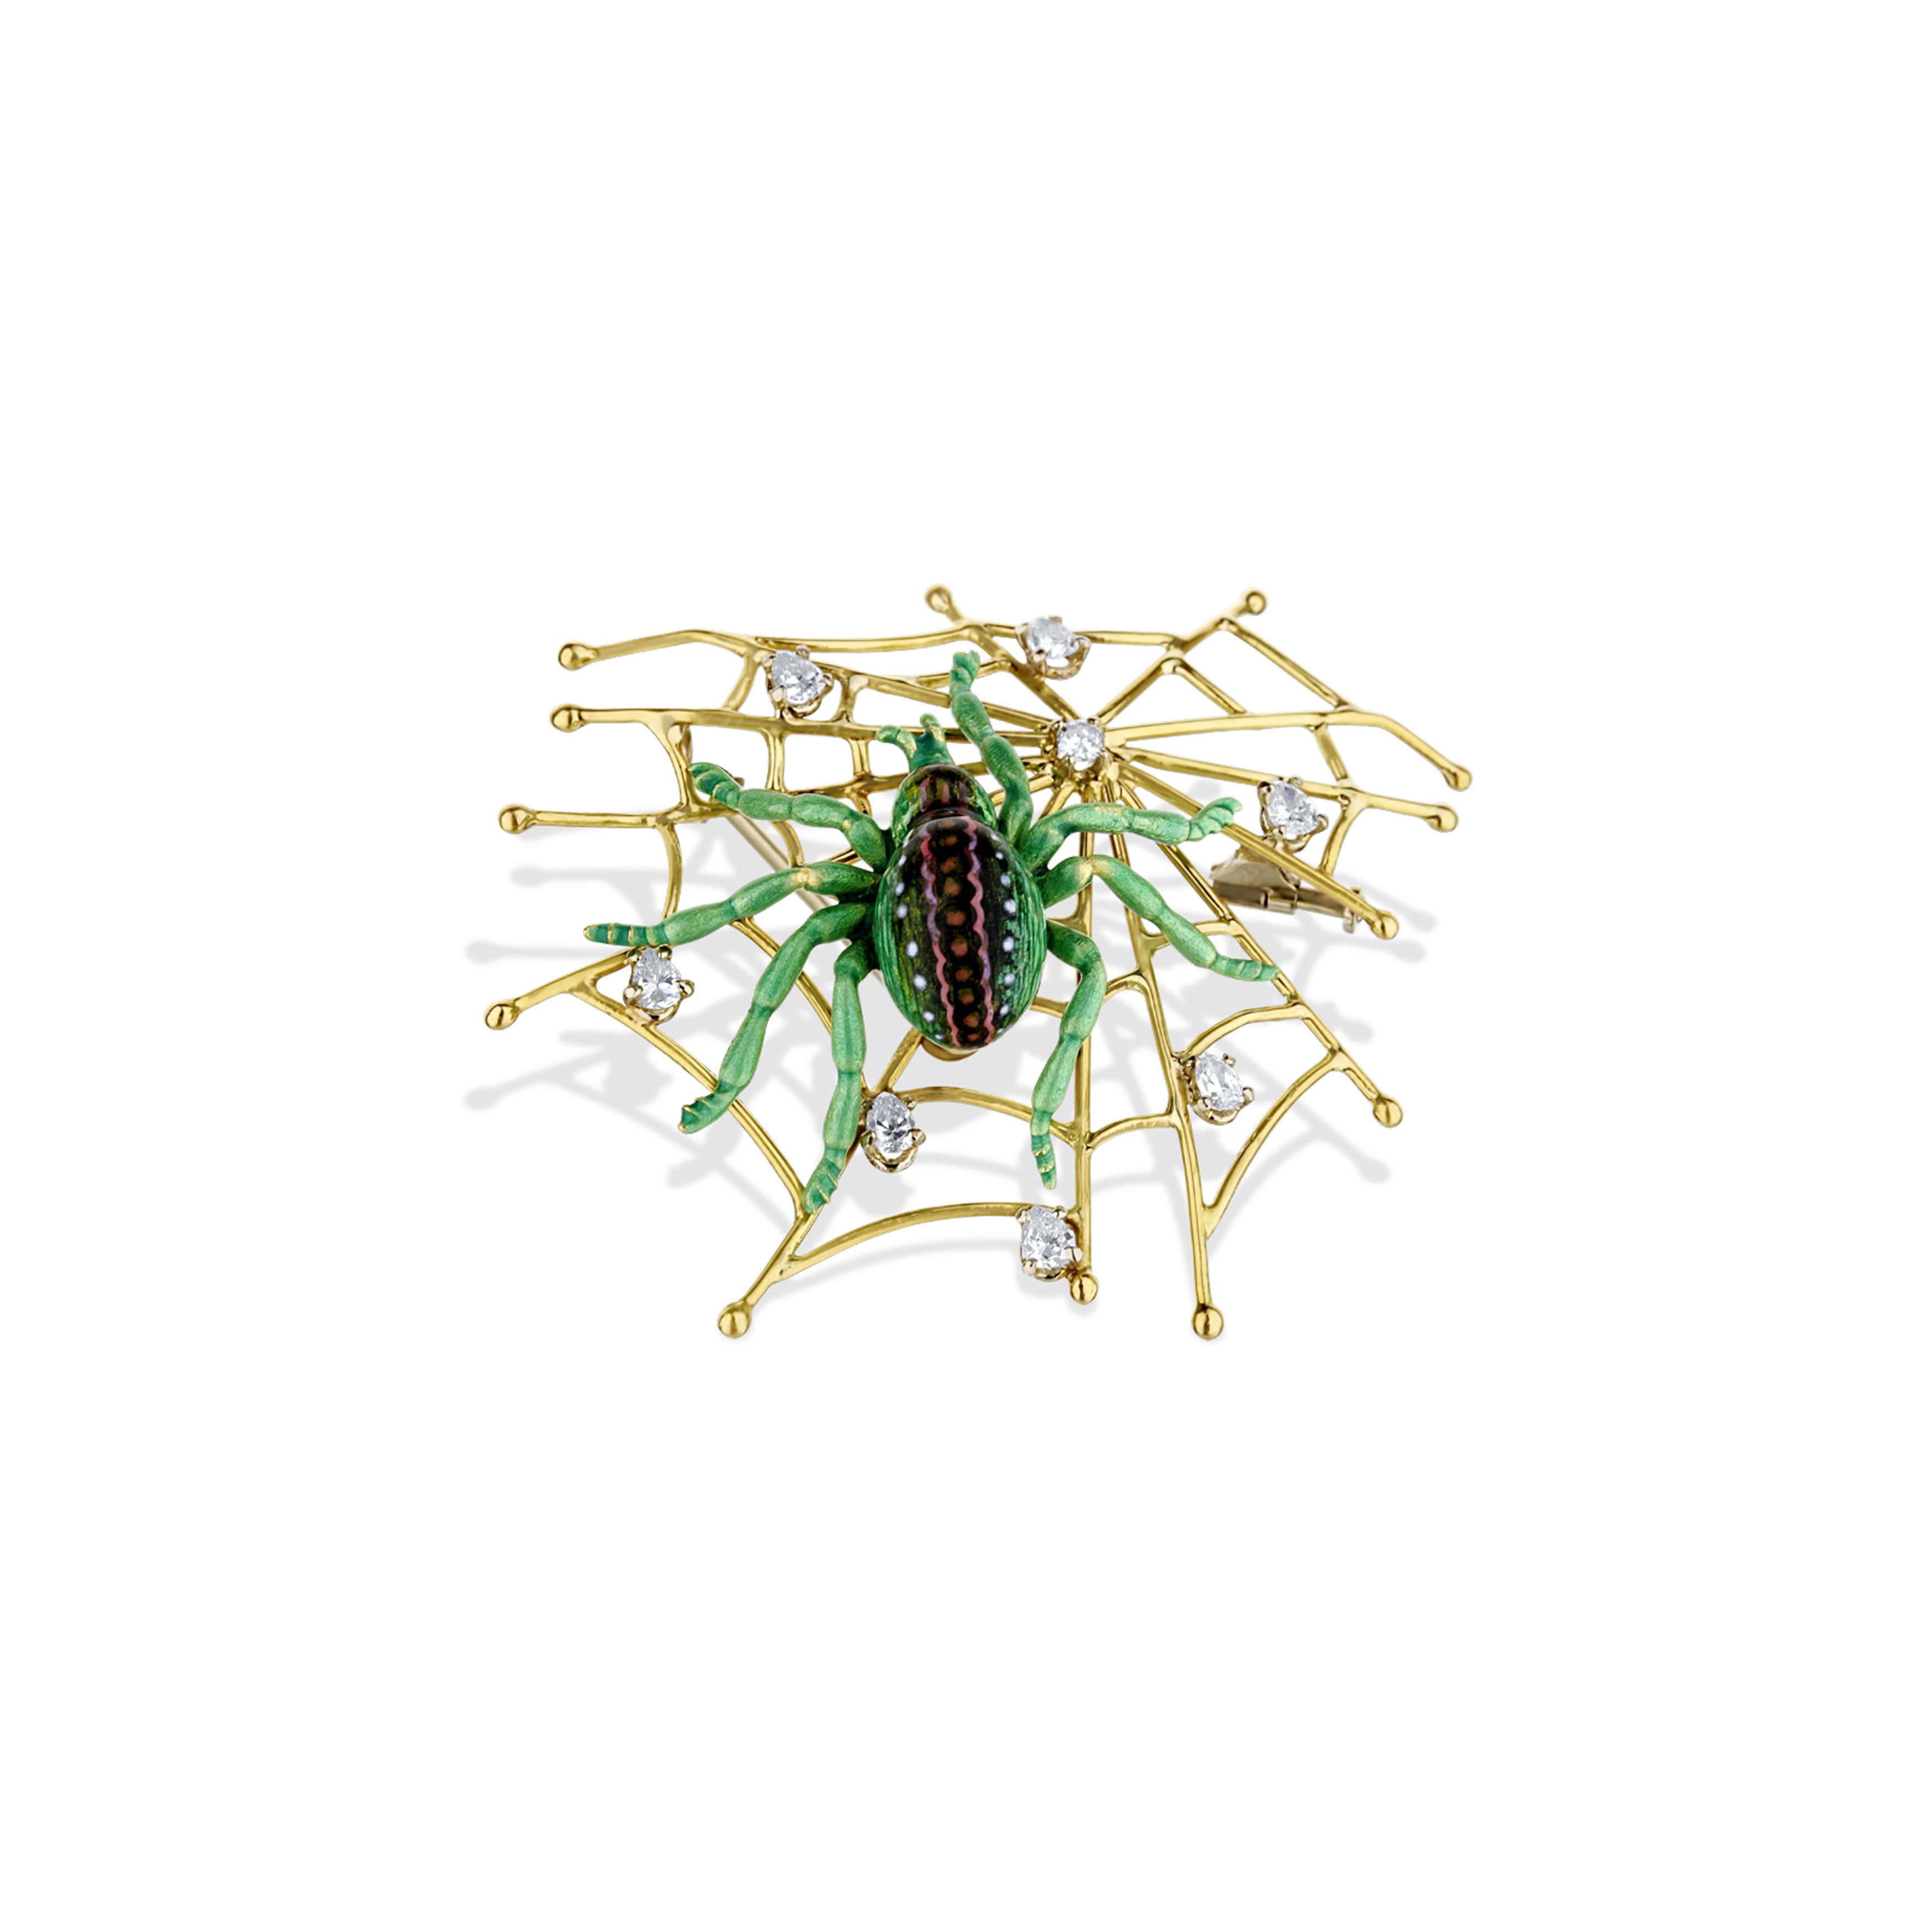 Bellini Florence 18K Yellow Gold Spider Web Brooch